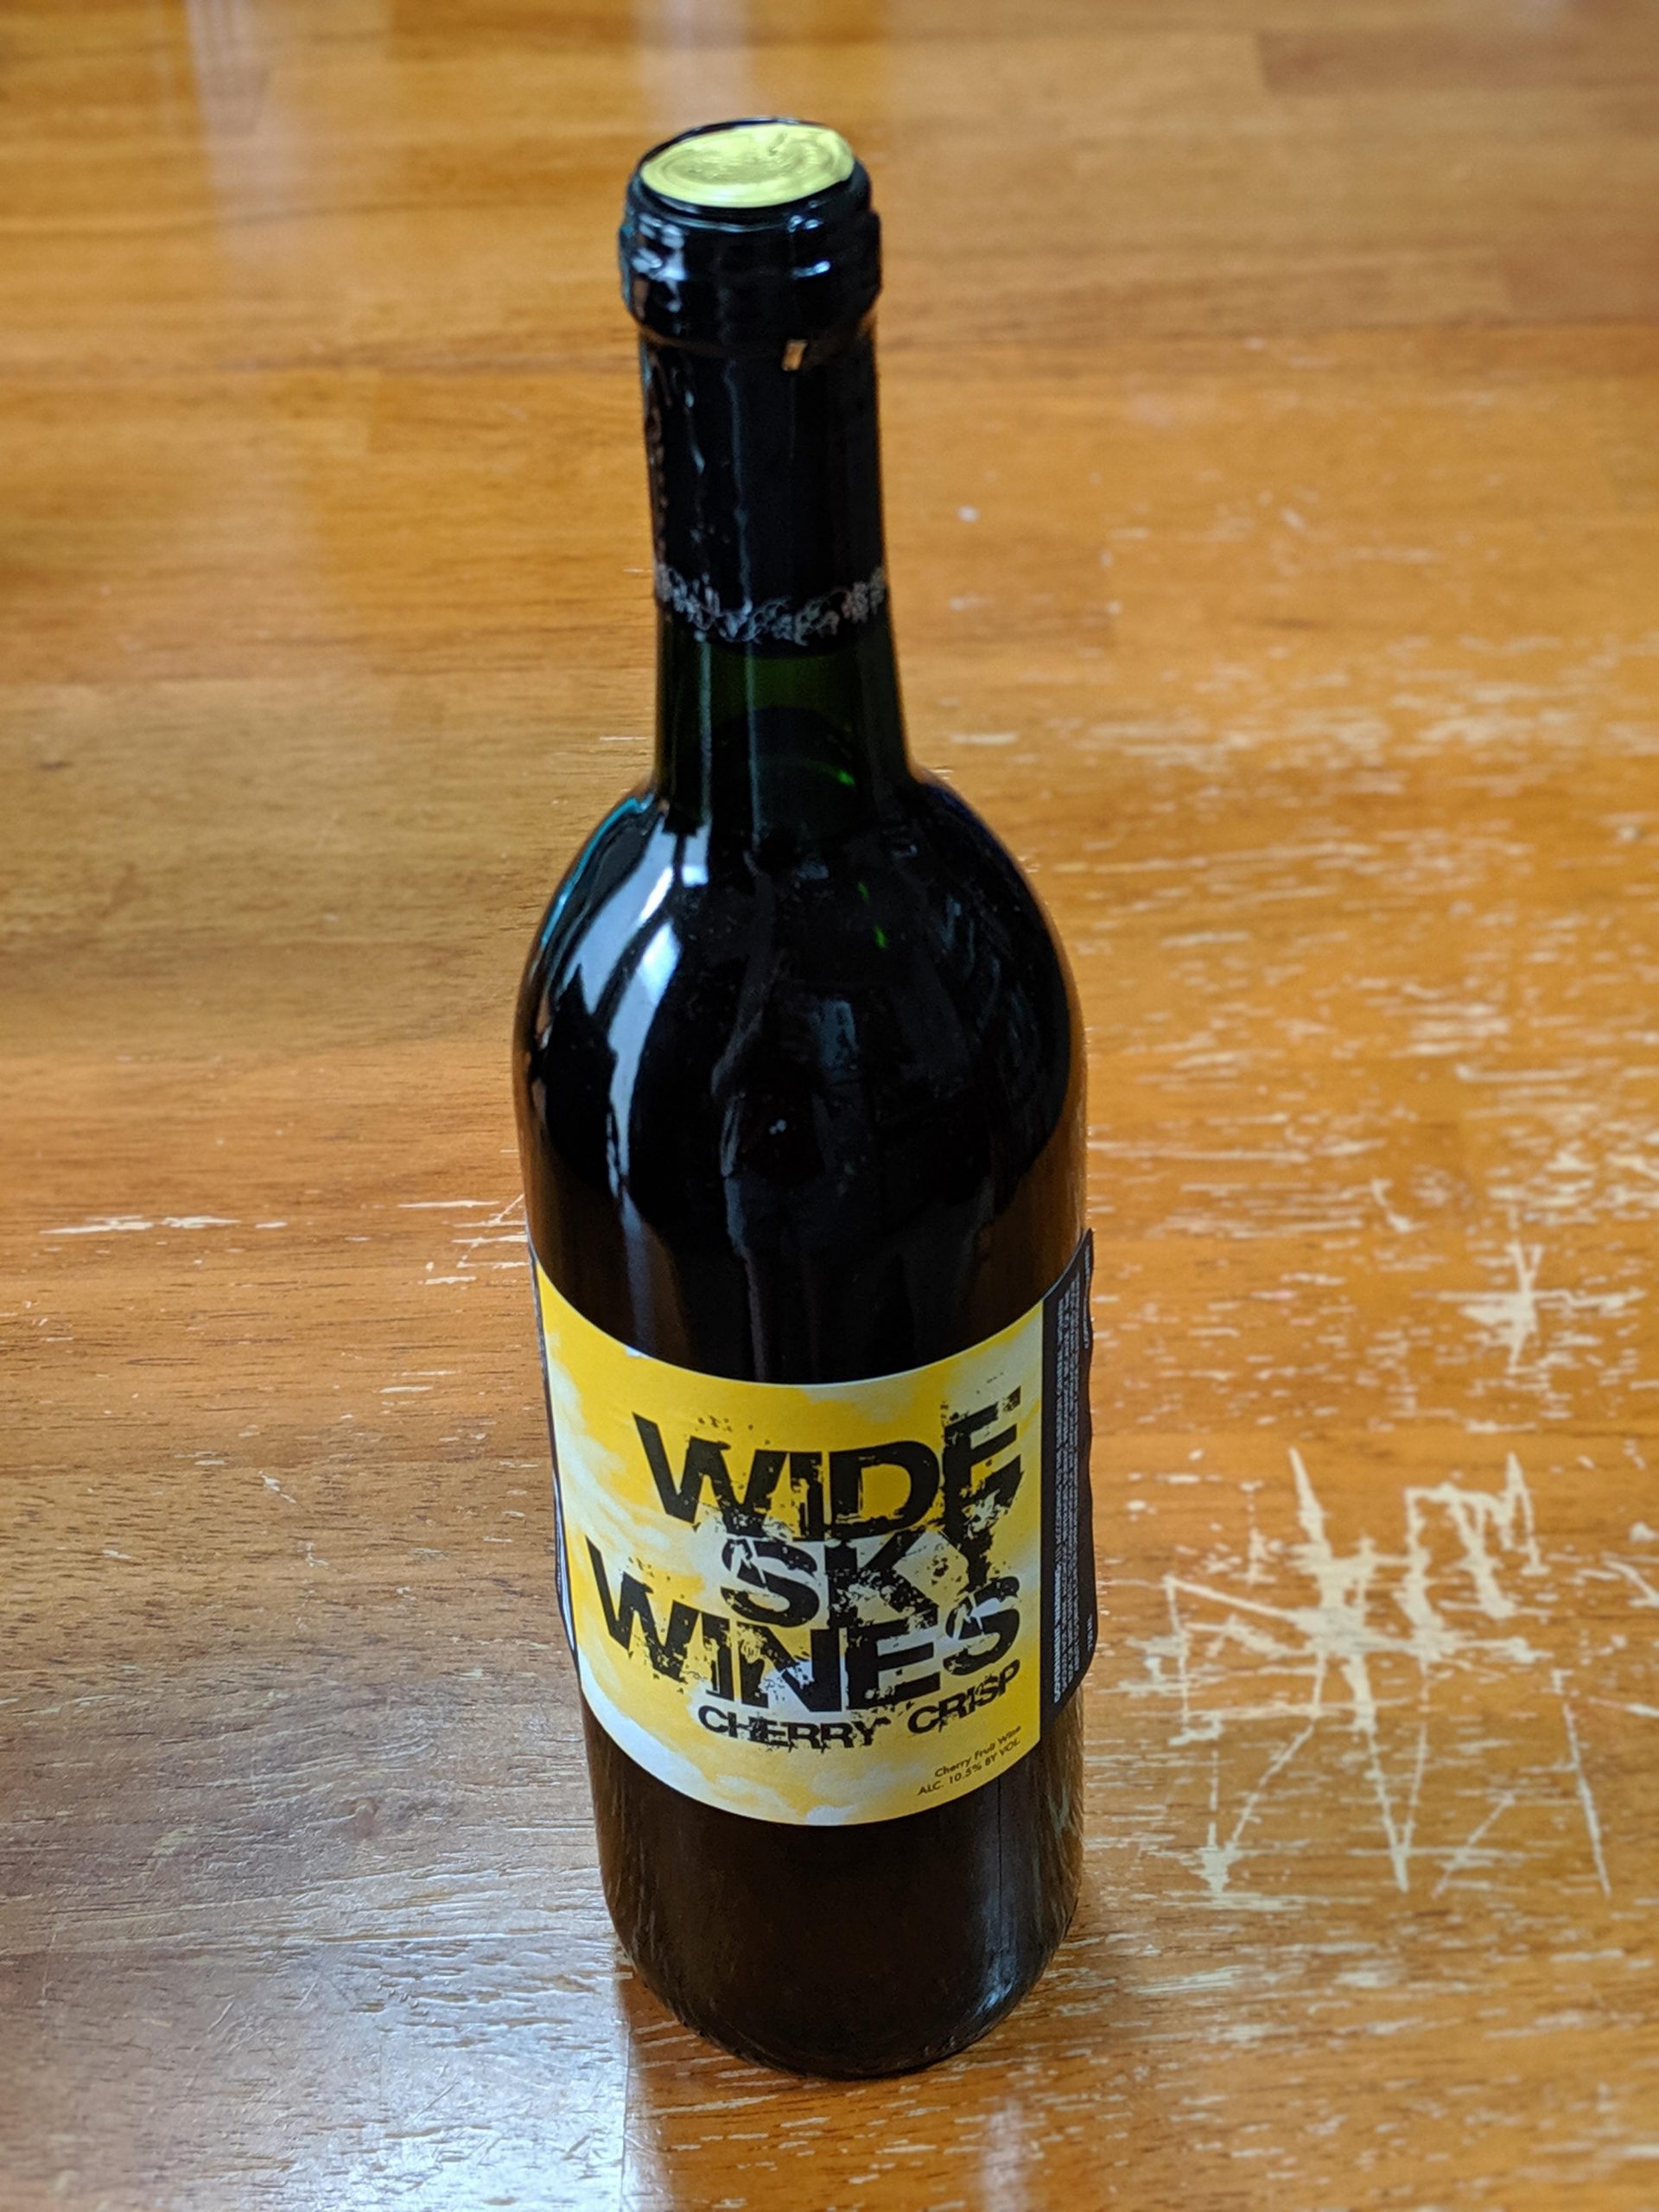 Anyone know where I can buy this wine in Sioux Falls? The ...